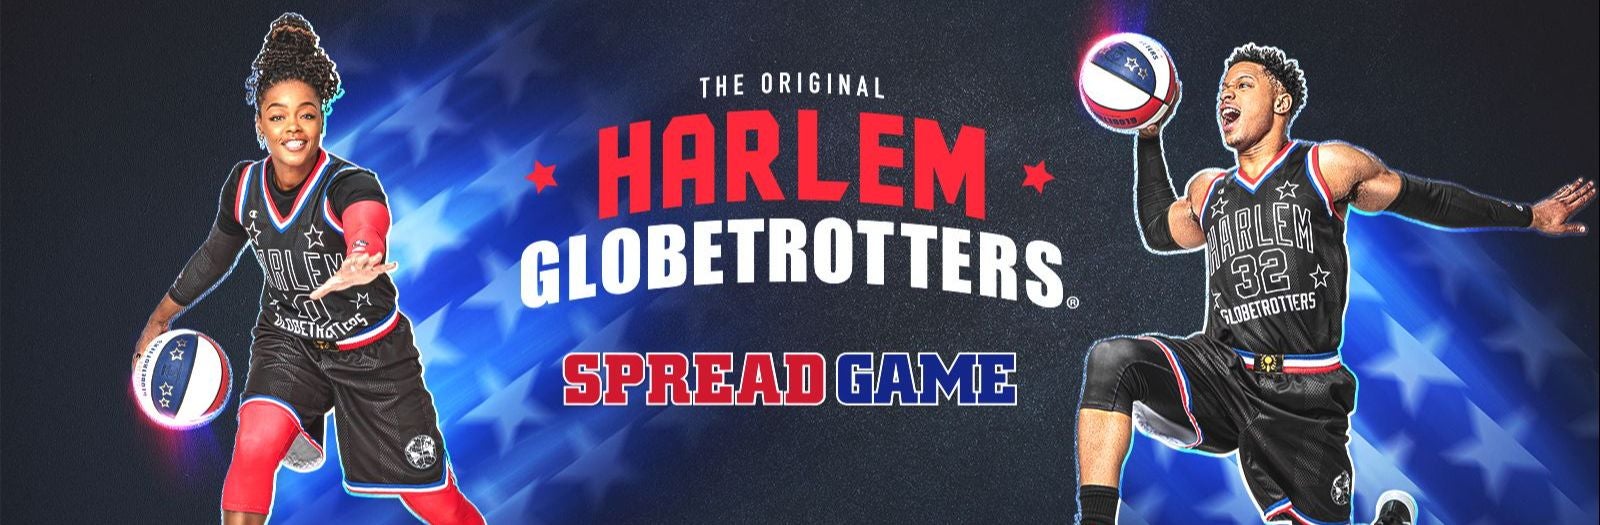 Tonight: Harlem Globetrotters - Spread Game Tour